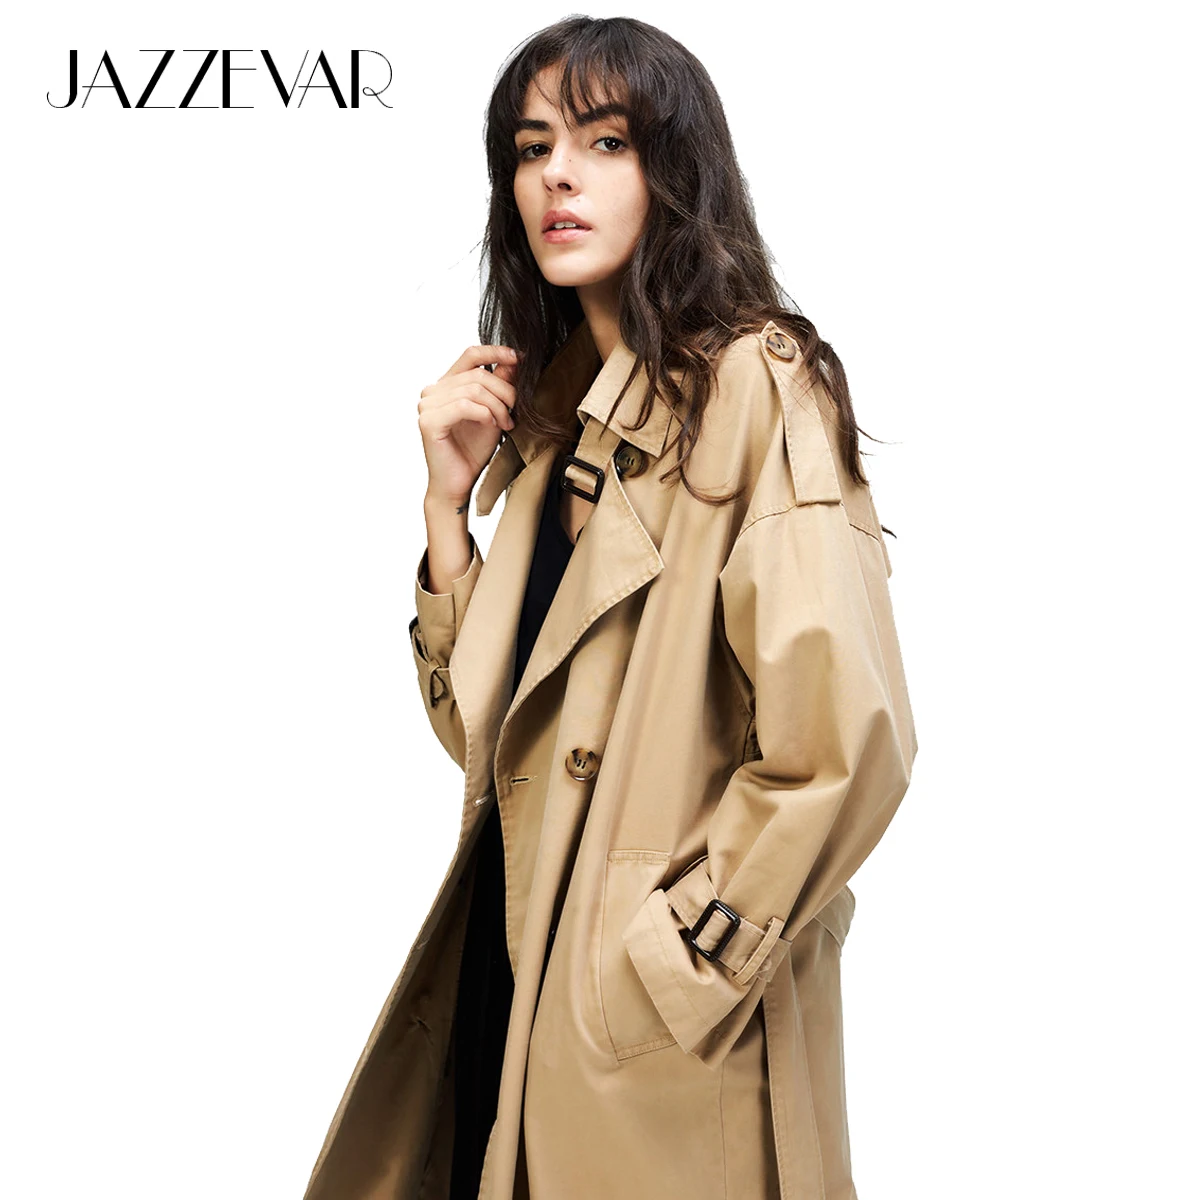 JAZZEVAR 2023 Autumn New Women's Casual Trench Coat Oversize Double Breasted Vintage Washed Outwear Loose Clothing